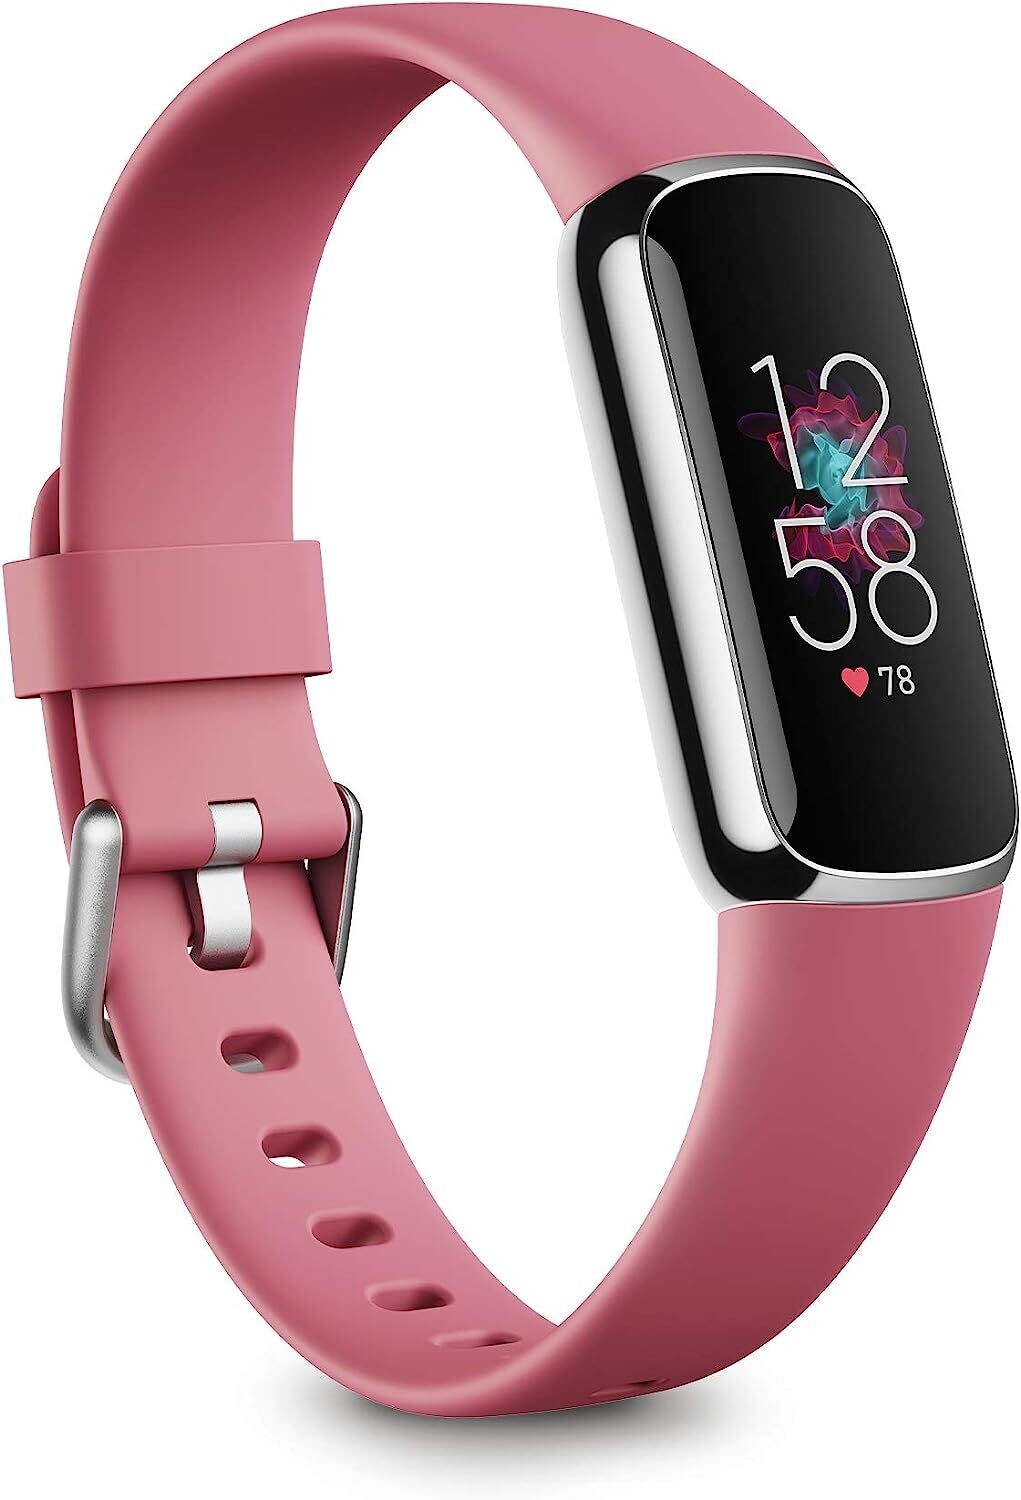 Fitbit Luxe Fitness and Wellness Tracker with Stress Management, Sleep Tracking and 24/7 Heart Rate, Orchid/Platinum Stainless Steel, One Size, S & L Bands Included